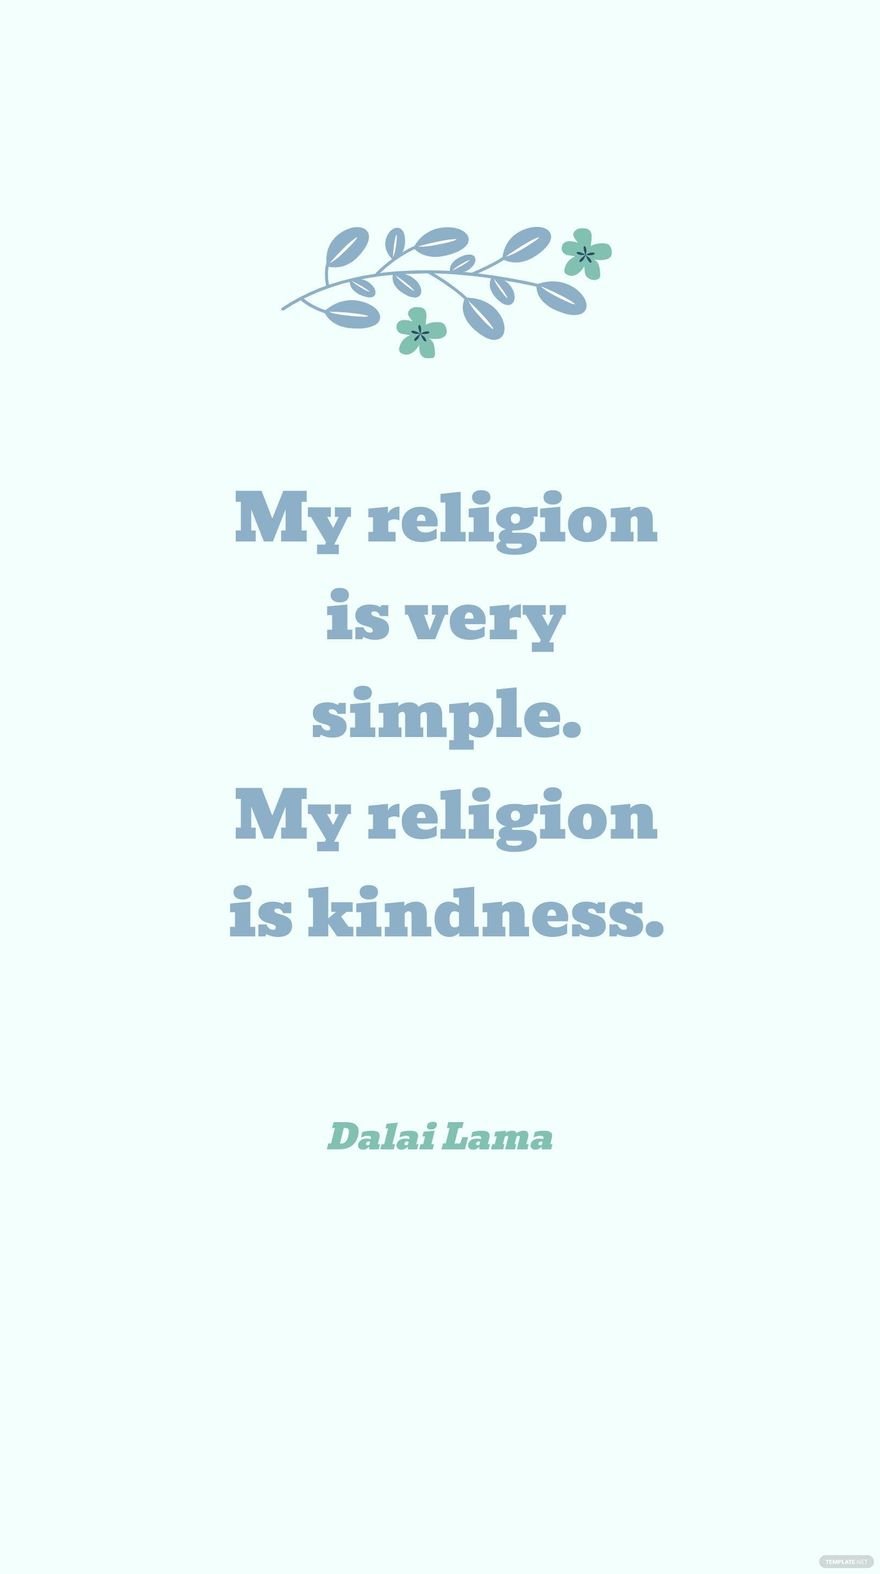 Dalai Lama - My religion is very simple. My religion is kindness.